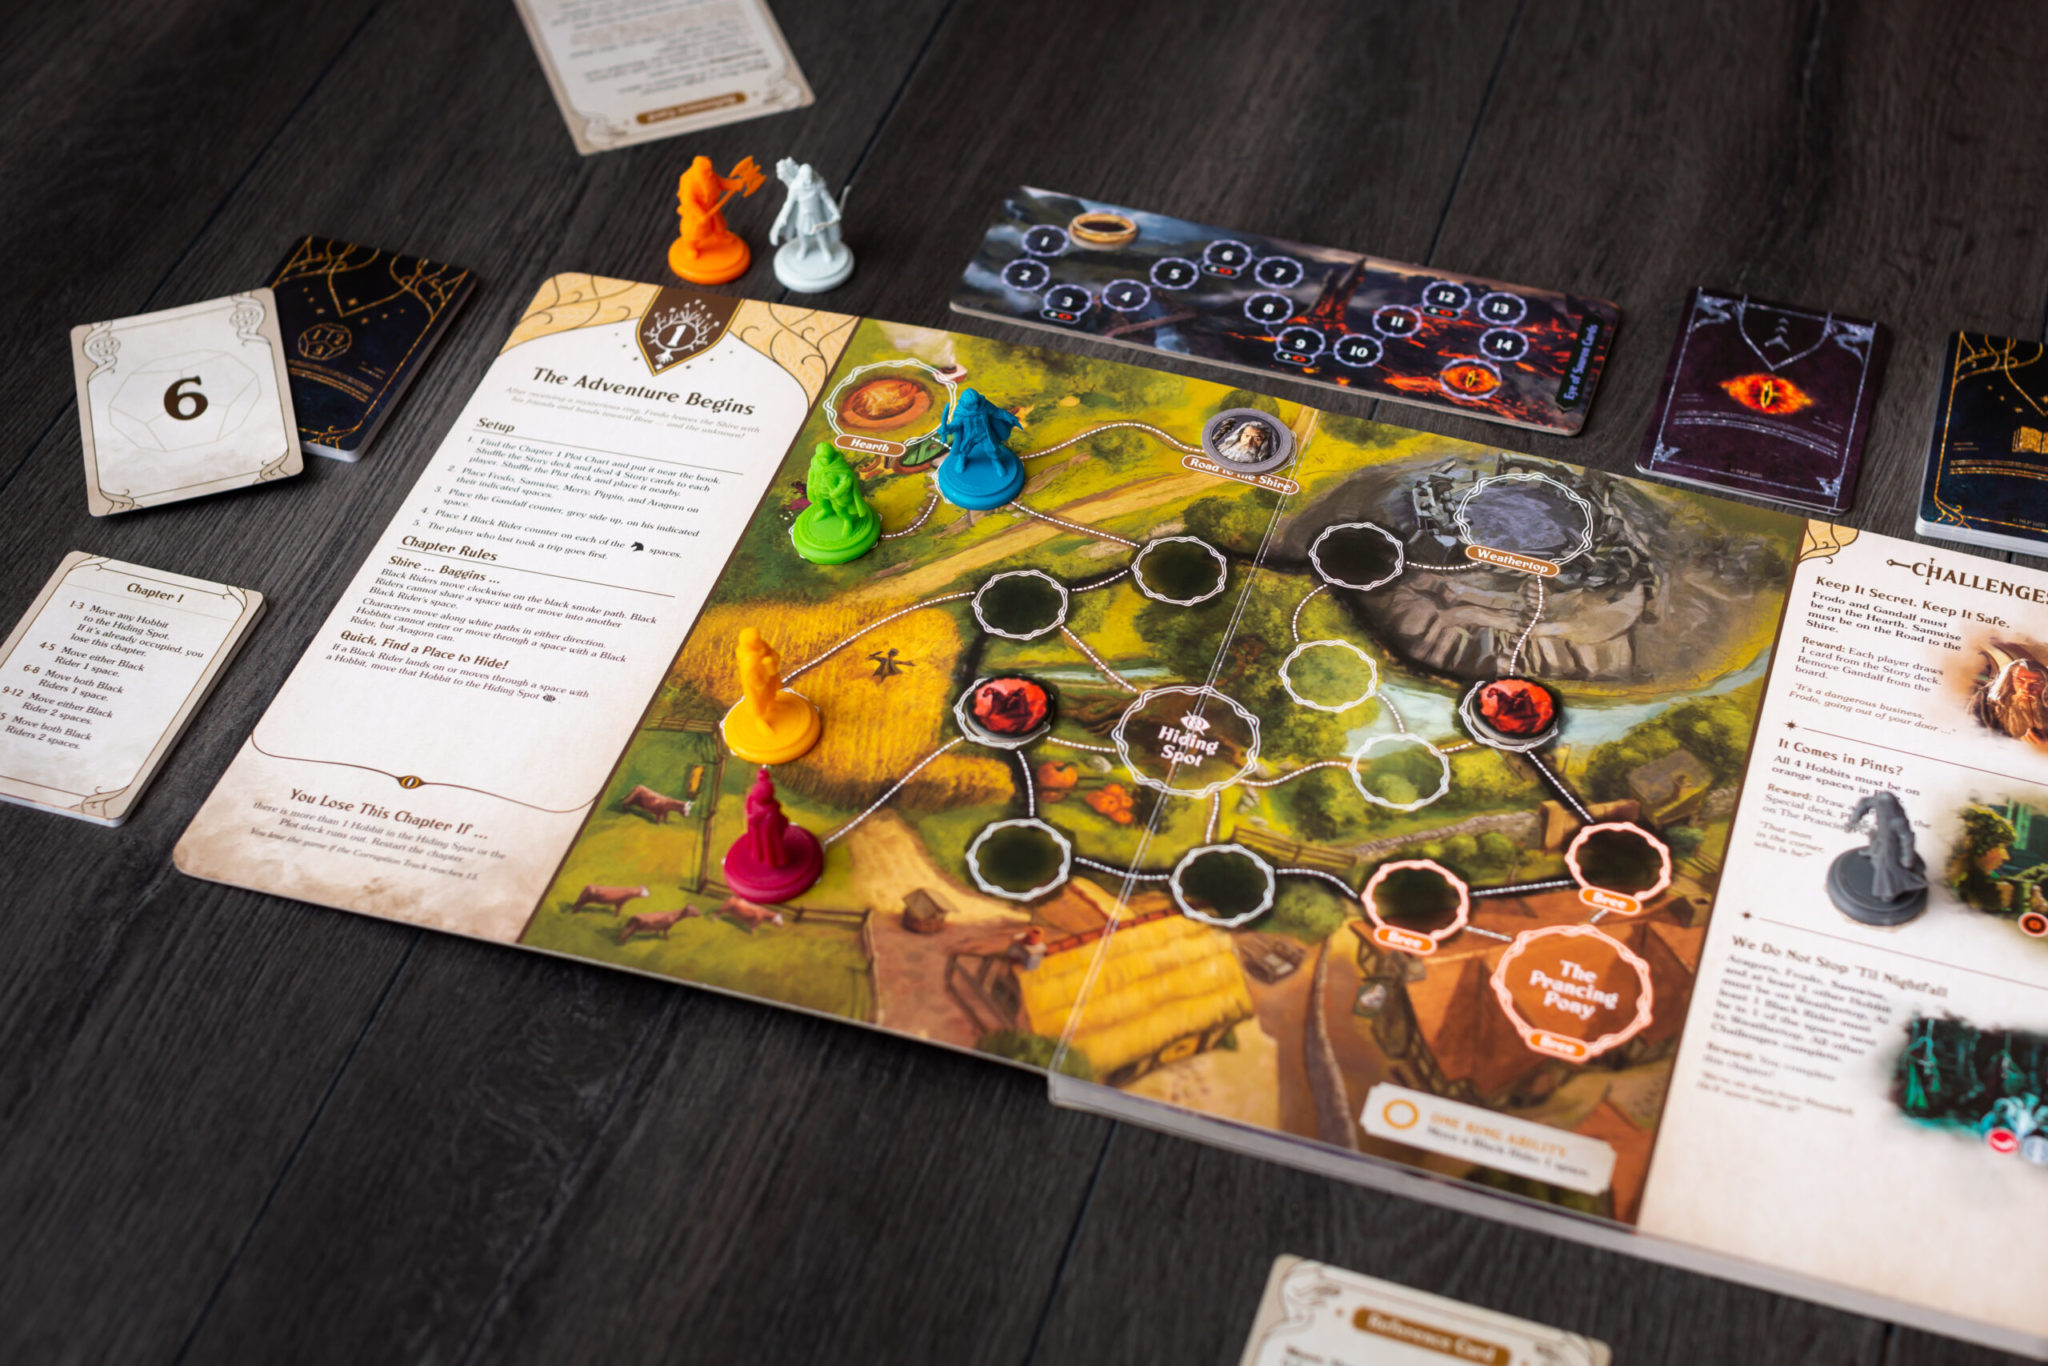 The Lord of the Rings Adventure Book Game board